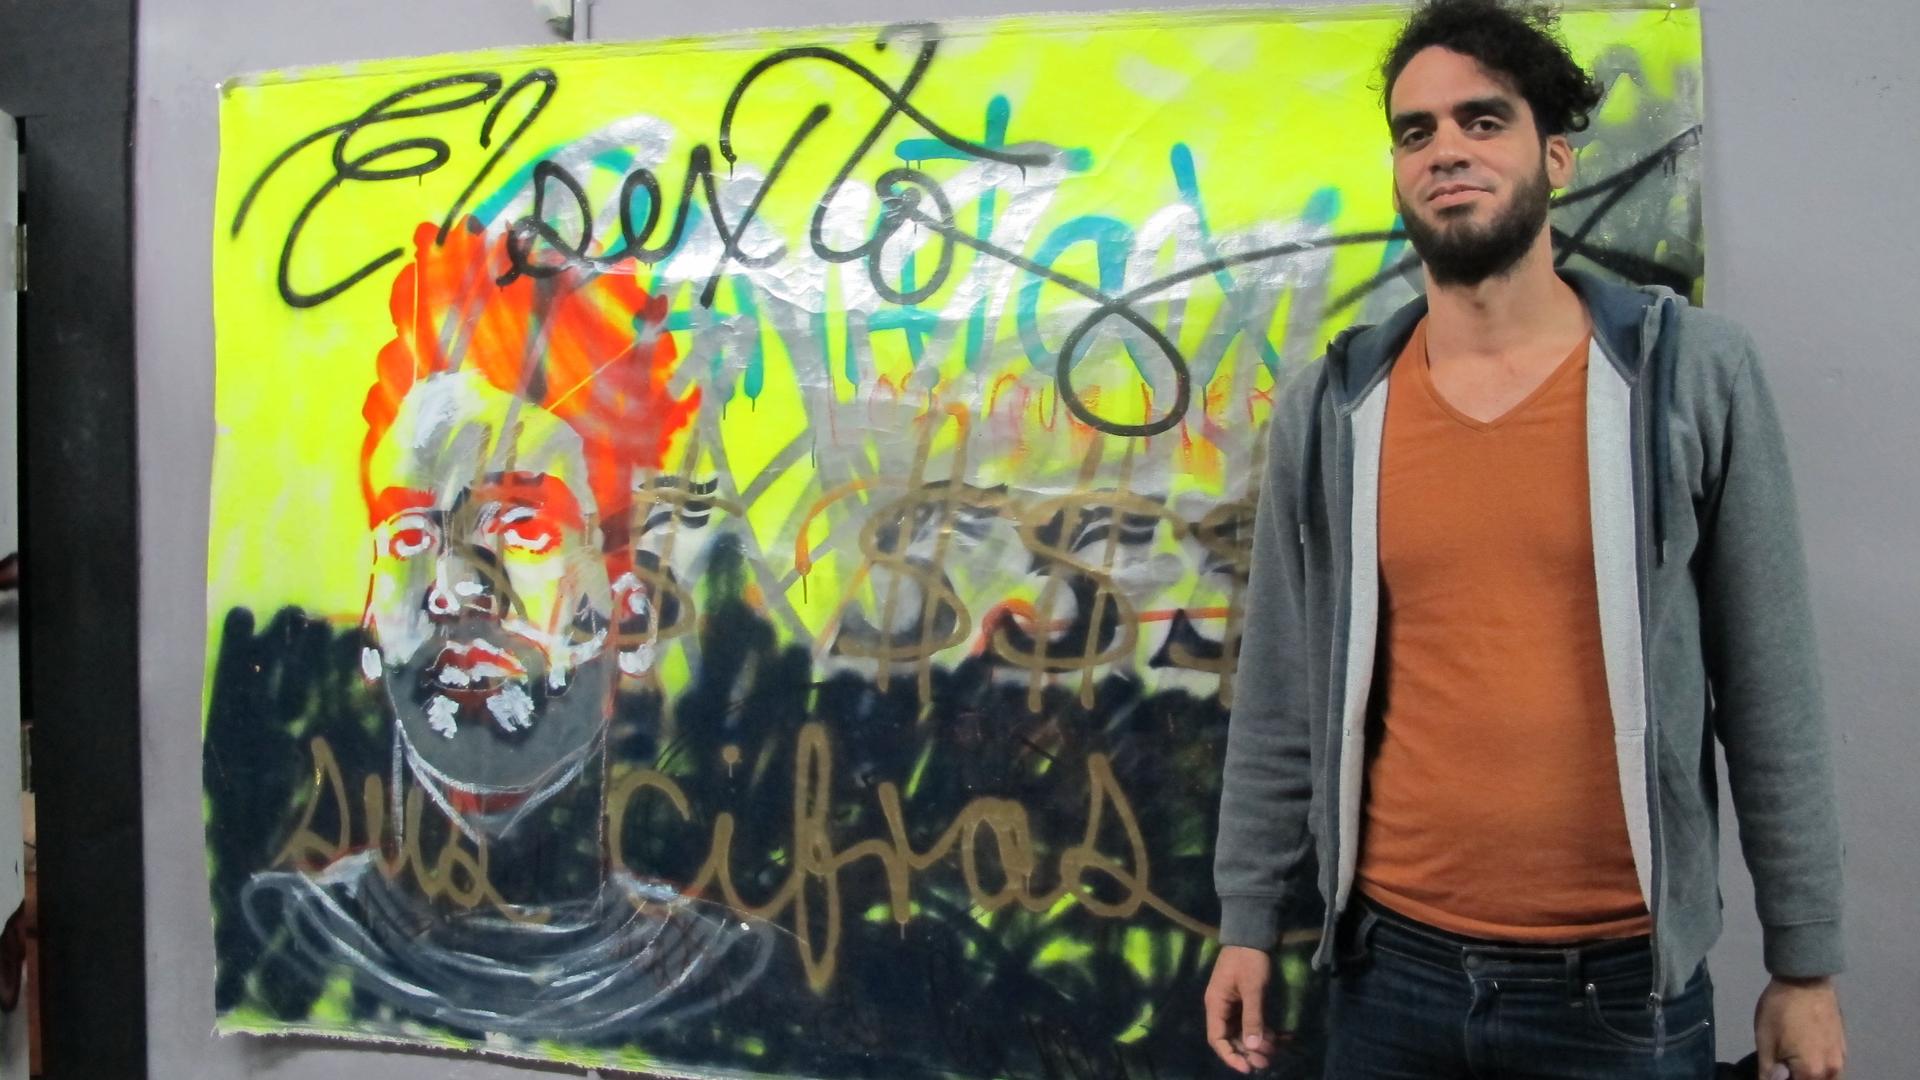 Danilo Maldonado is a graffiti artist from Cuba and one of the students from Cuba studying at Miami Dade College under a student visa. He's better known as "El Sexto," the name he uses to sign his artwork.